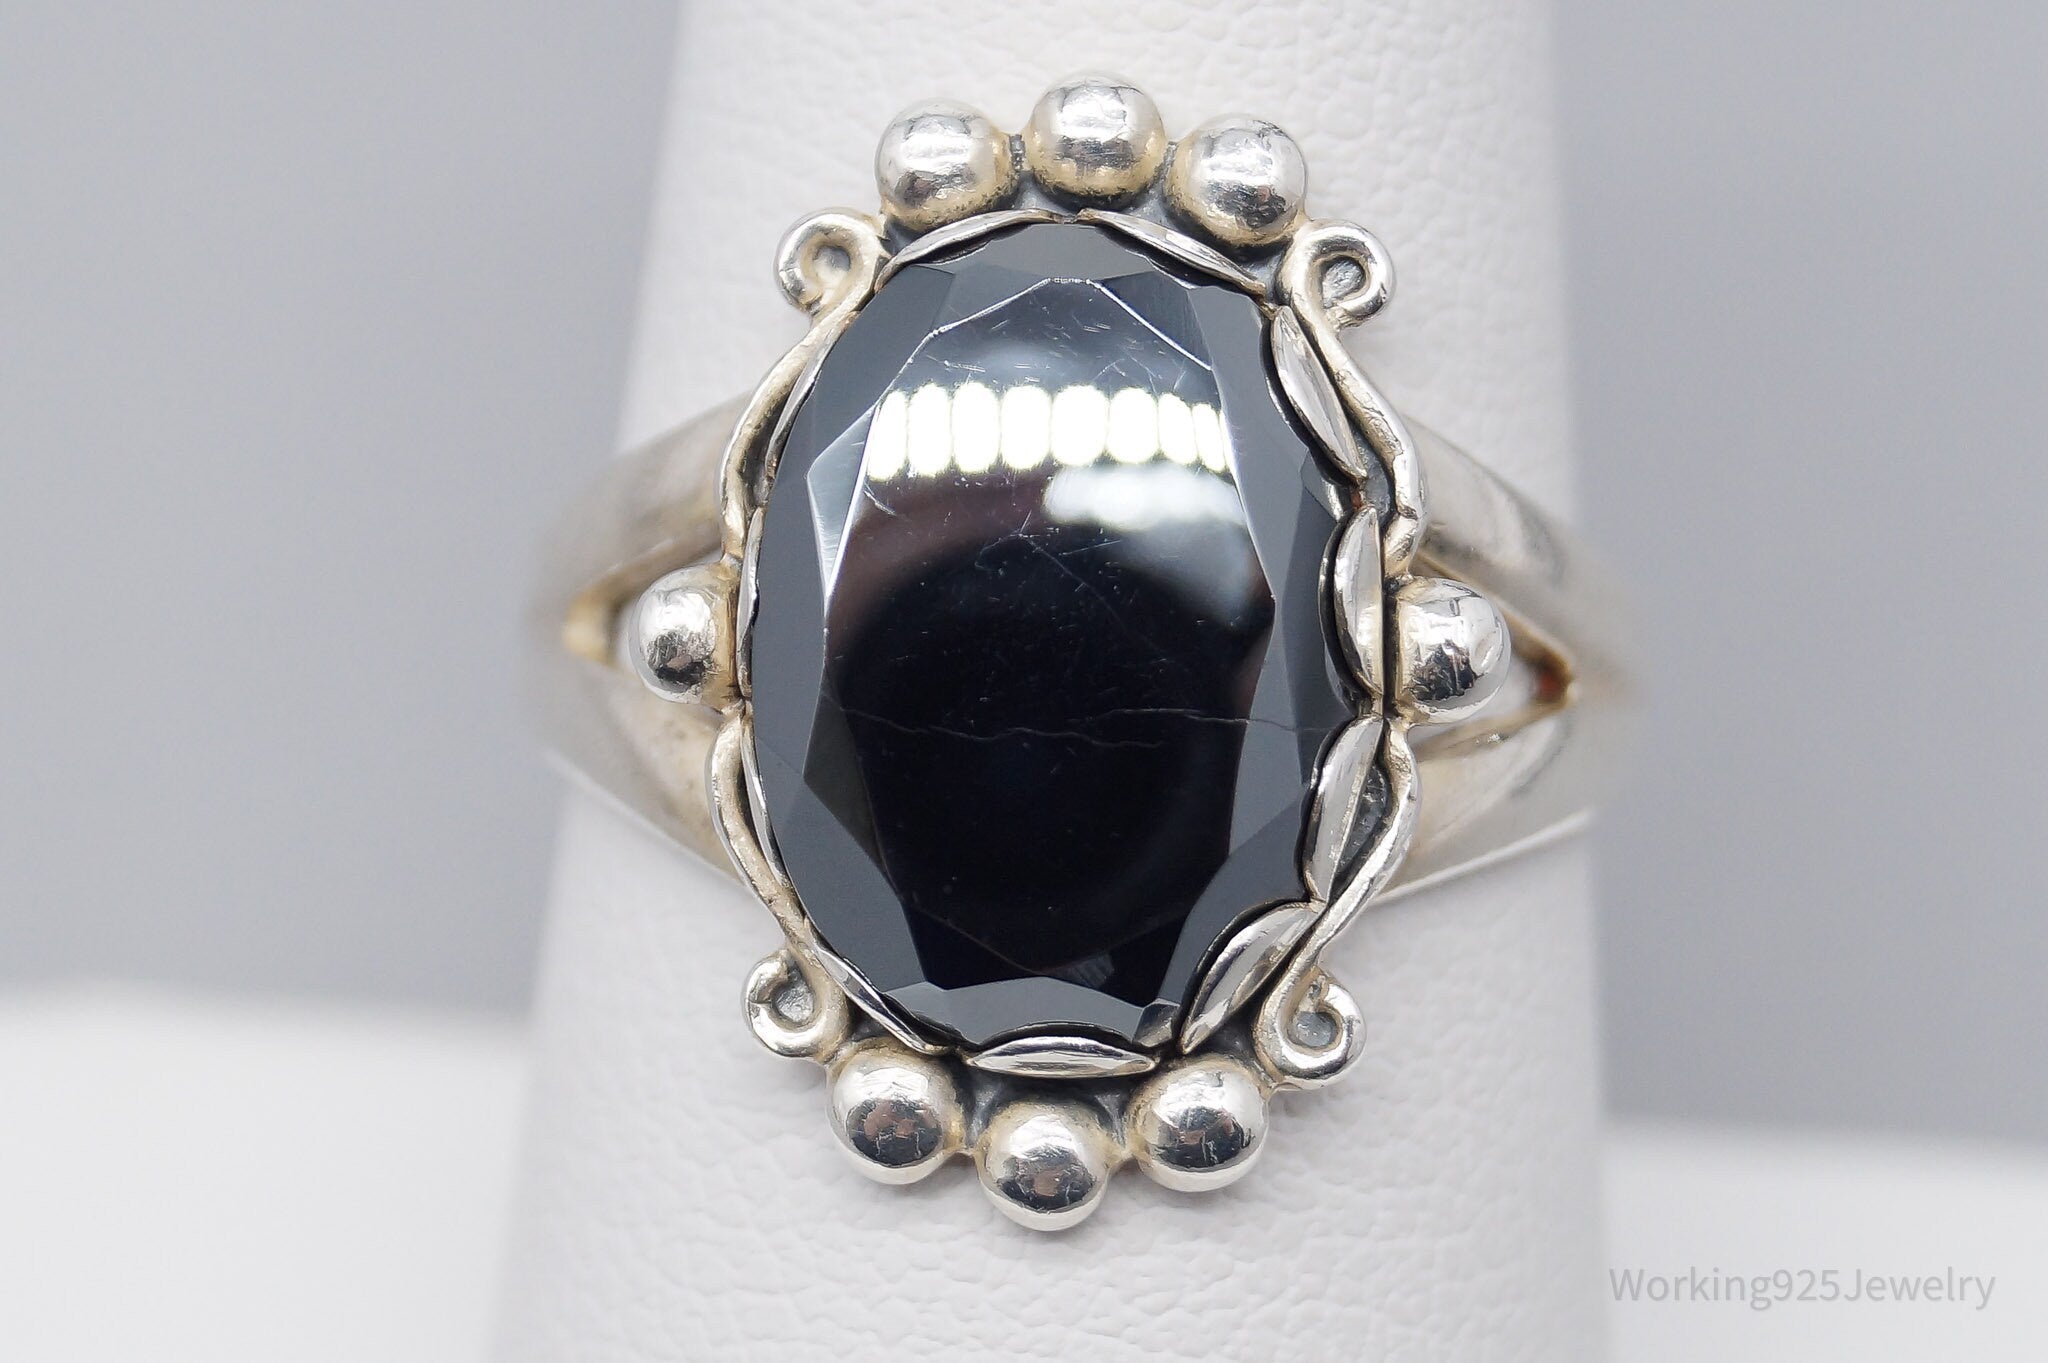 Vintage Native Bell Trading Post Hematite Sterling Silver Ring - Size 8